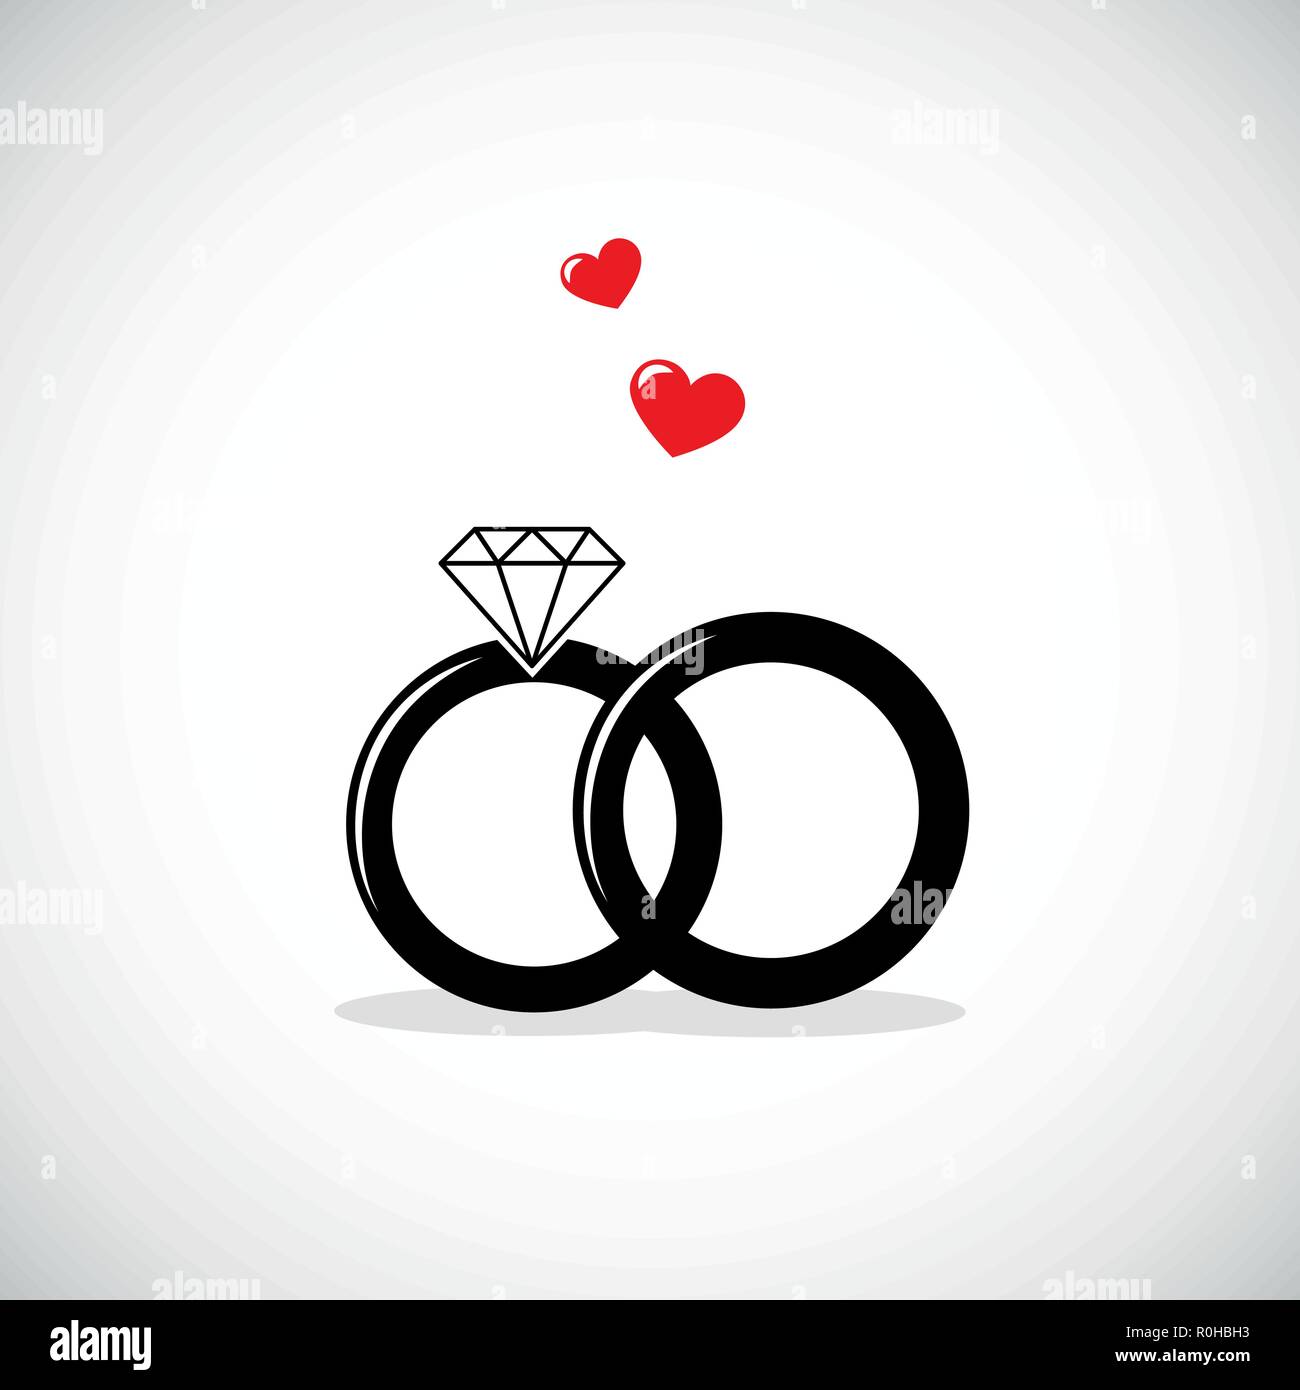 wedding rings icon with red heart vector illustration EPS10 Stock Vector